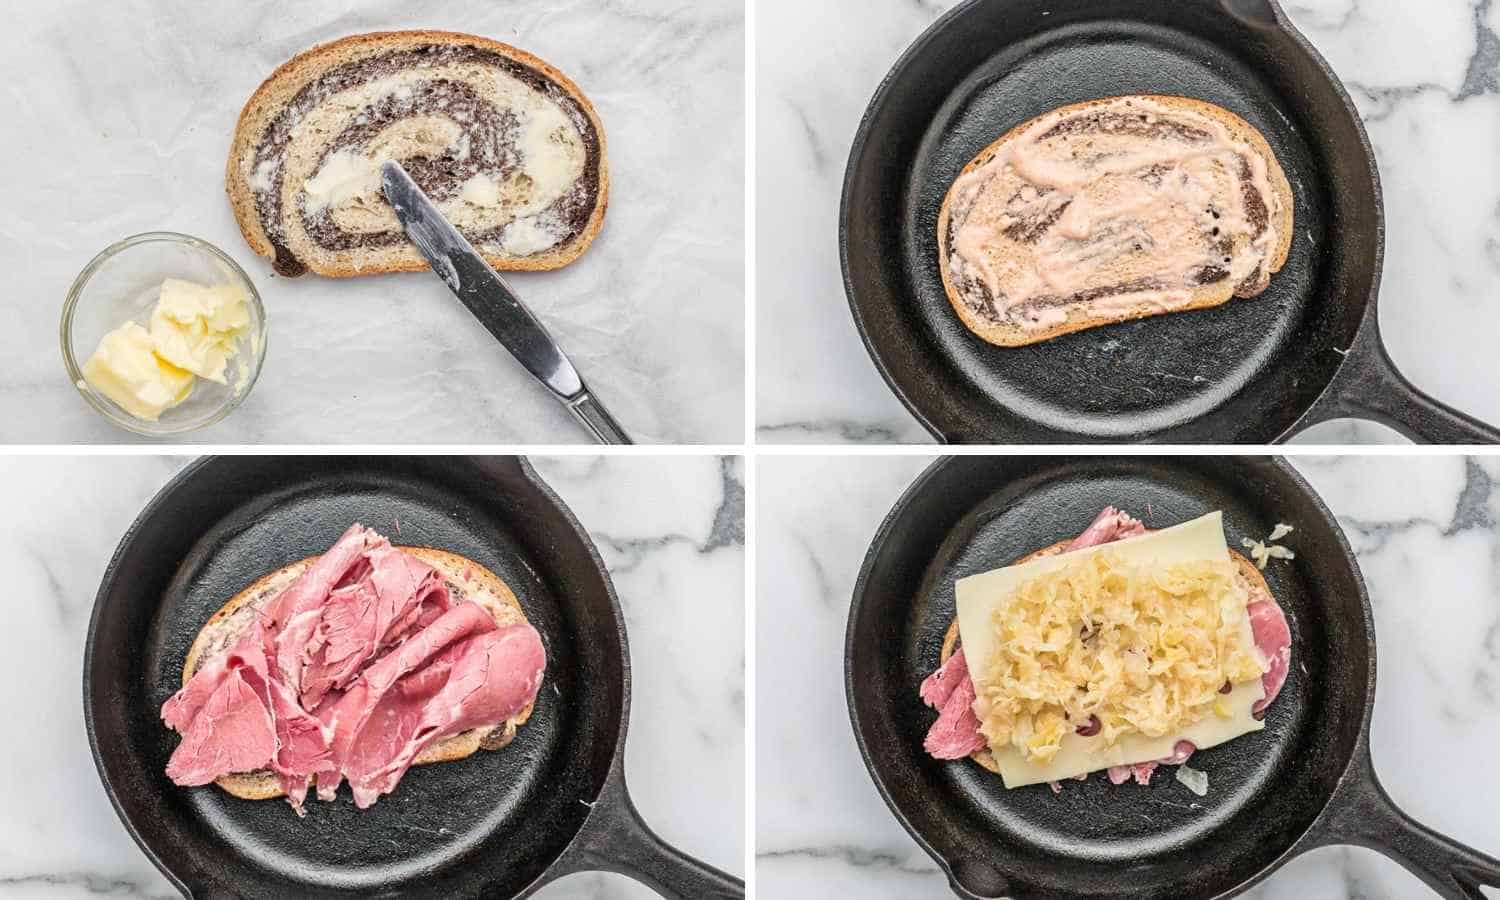 Collage of four images showing how to make a reuben sandwich